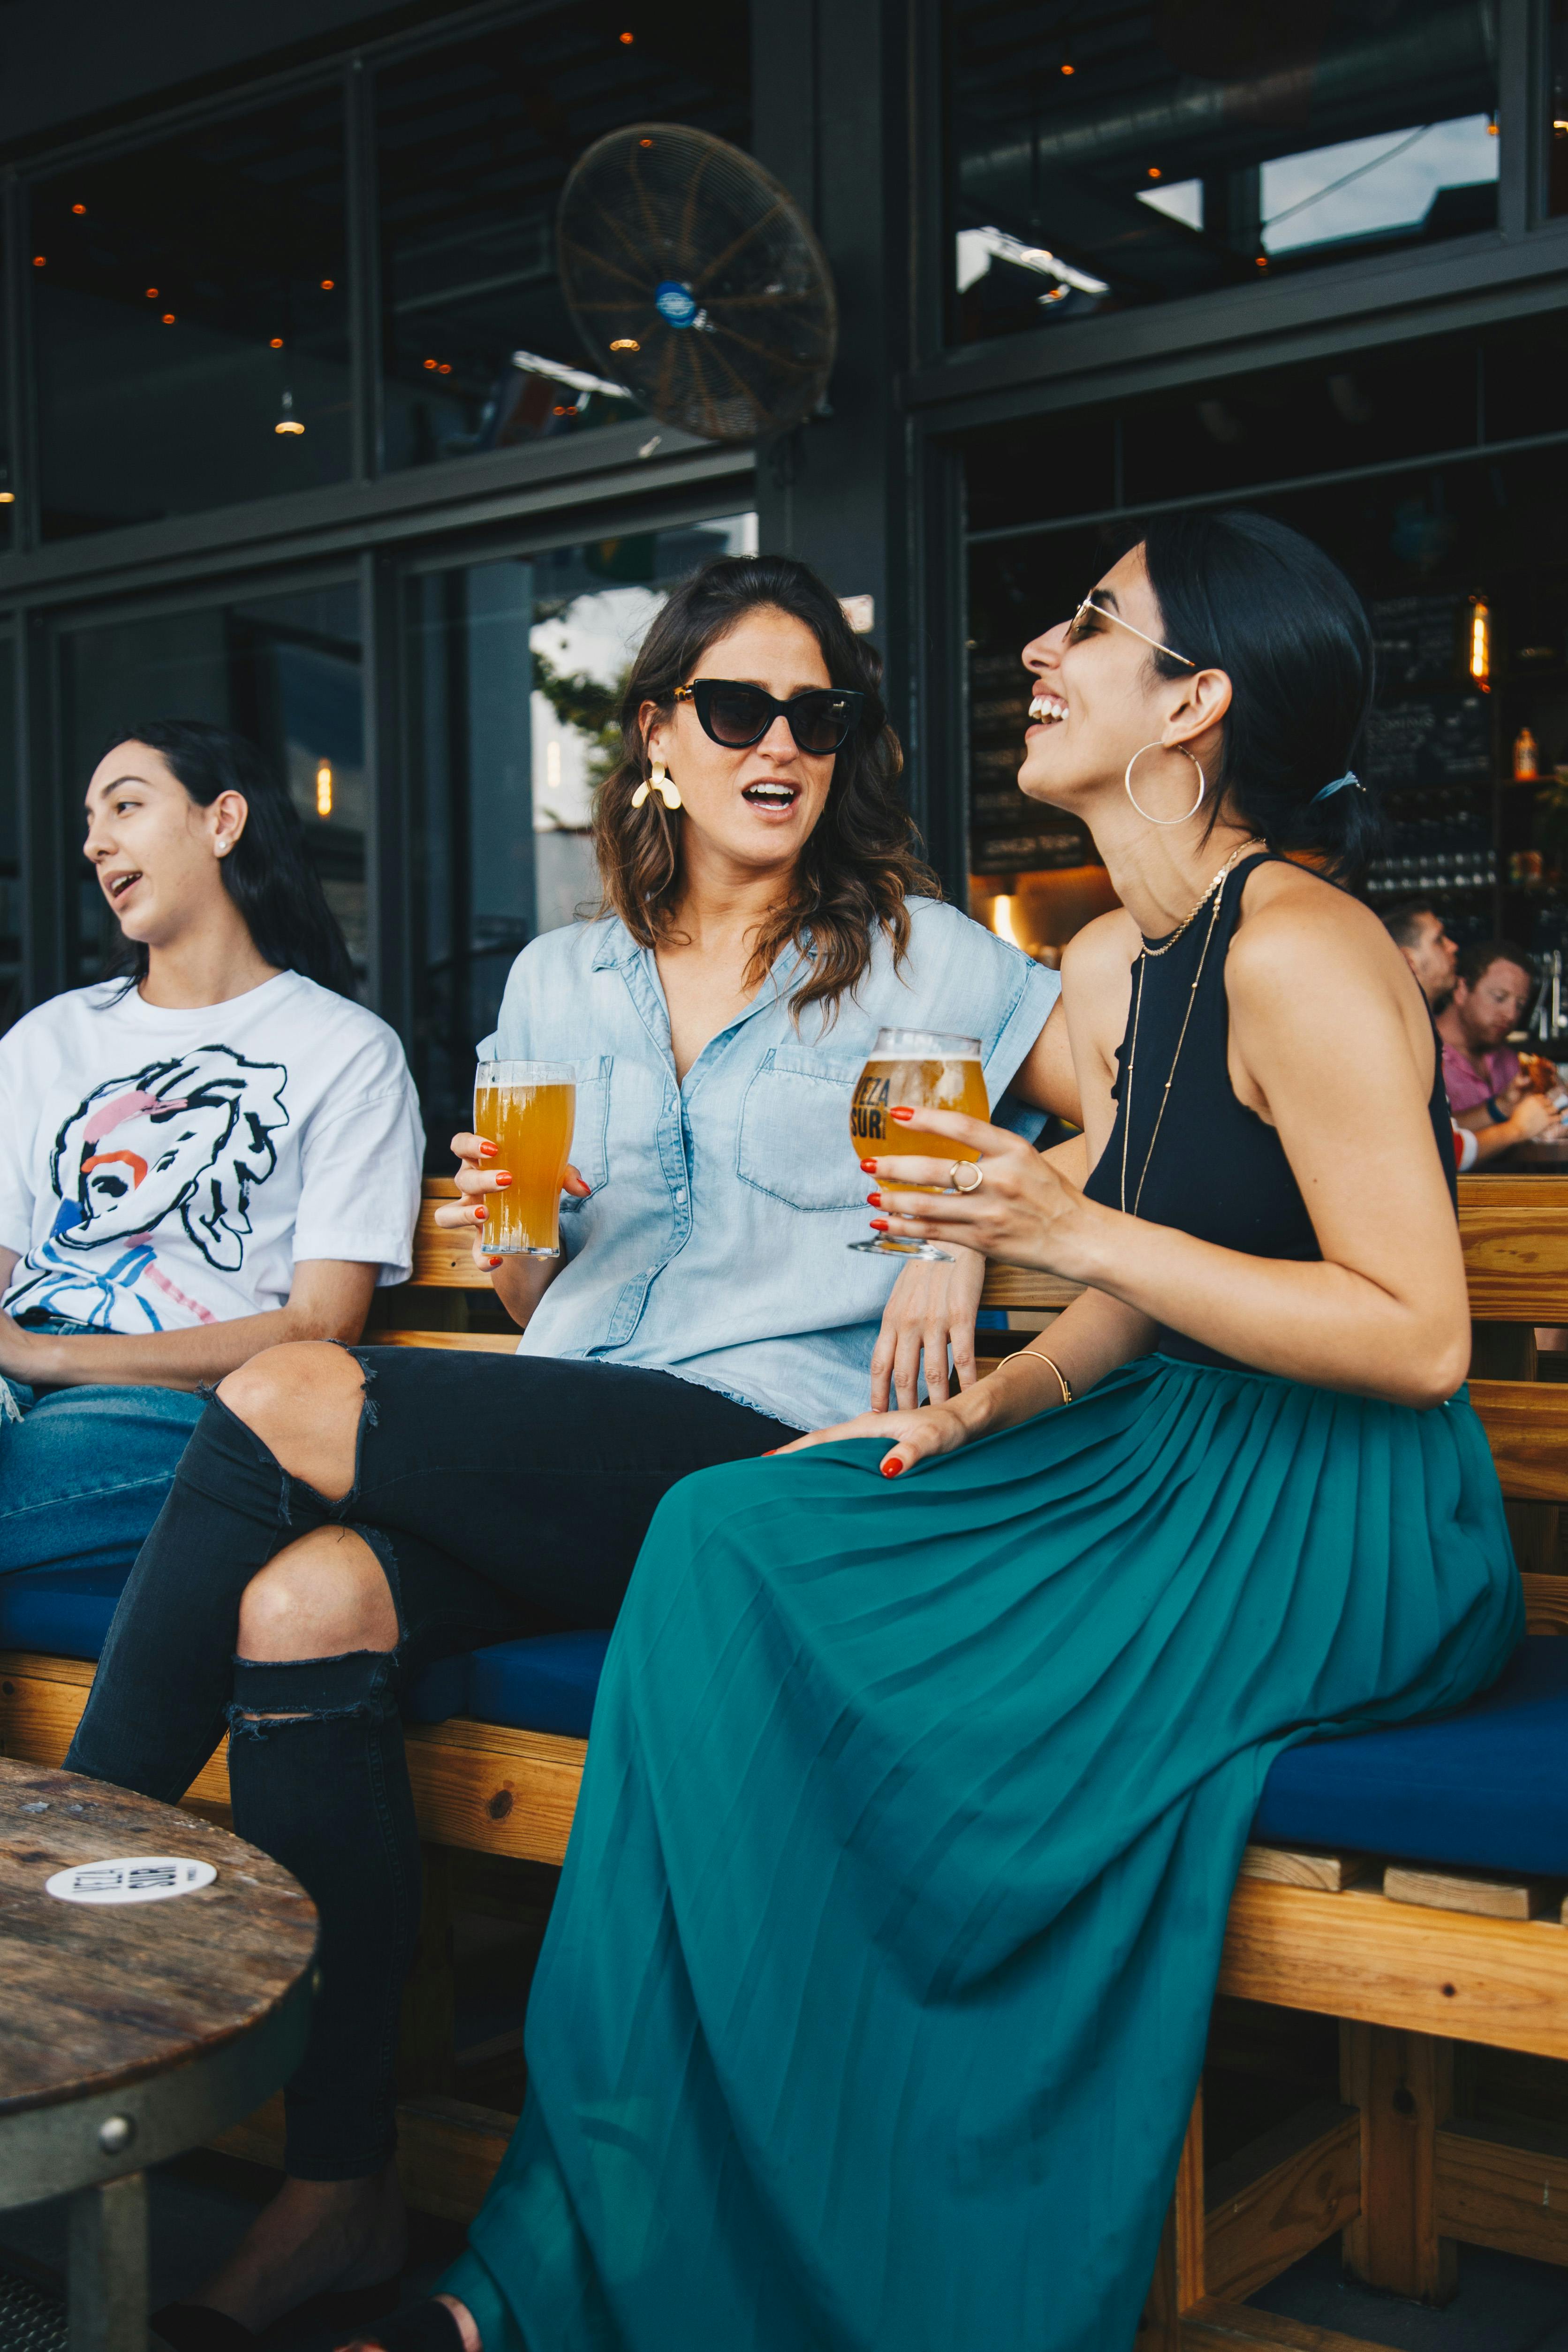 Woman laughing with her friends | Source: Pexels